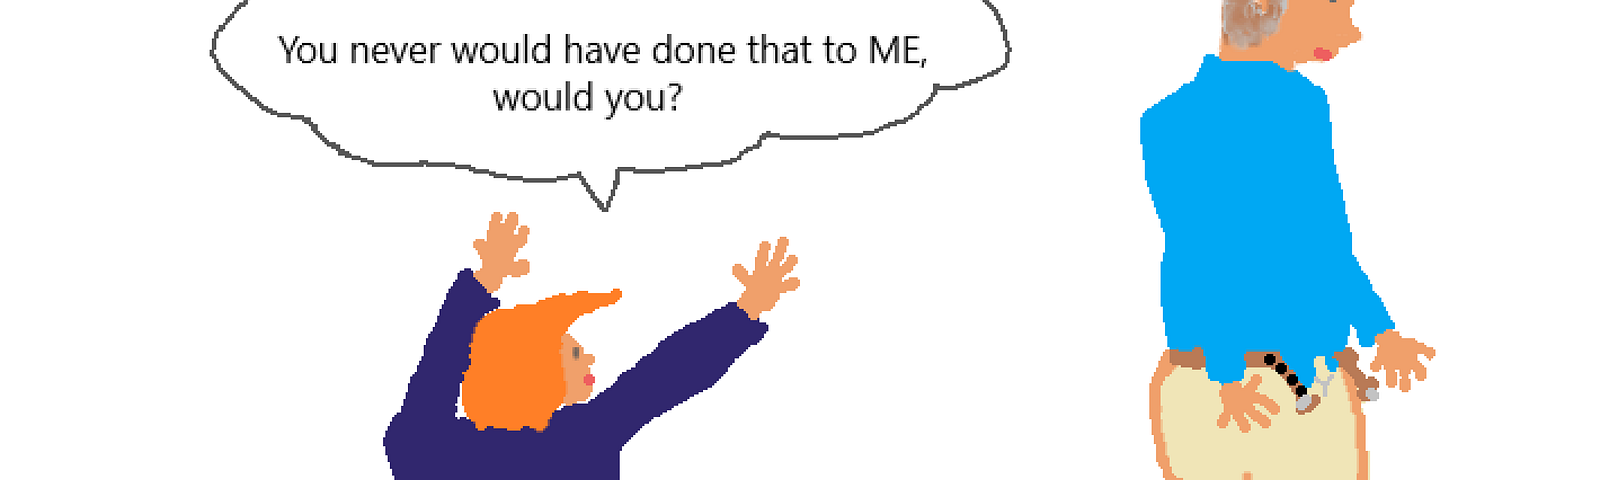 Trump’s Top 3 Cuts. A digital drawing of Donald Trump on his knees, reaching up towards Vladimir Putin as he walks away while fastening his pants zipper and belt. The caption says, “You never would have done that to ME, would you?”